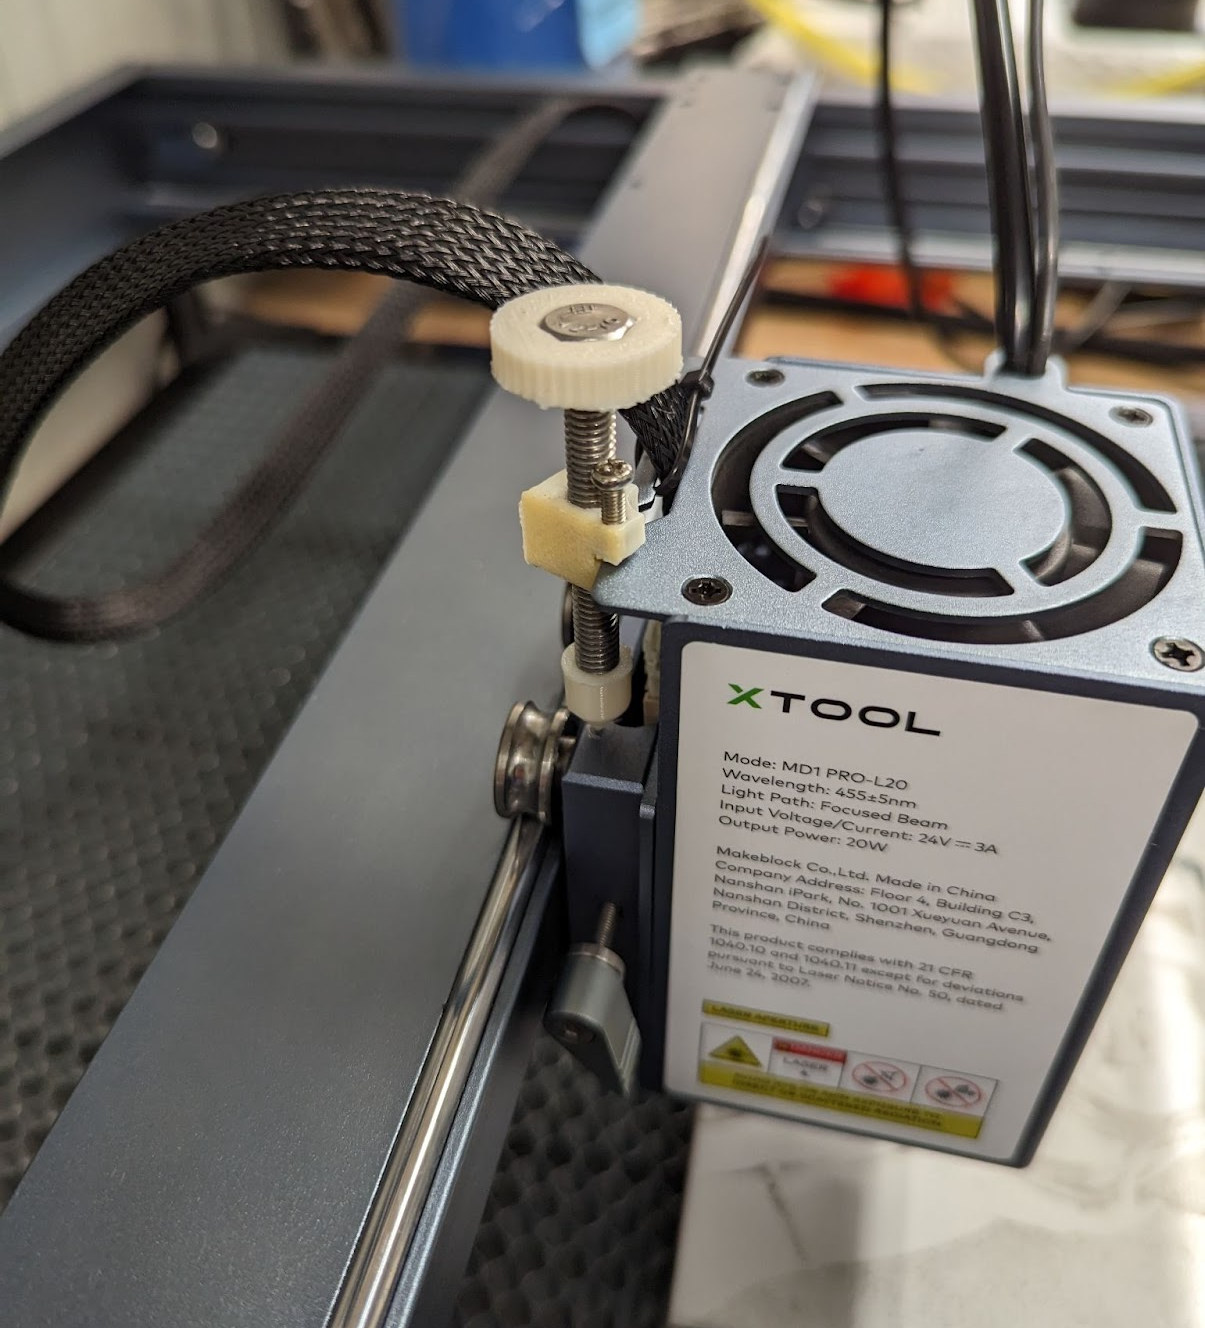 xTool D1 Pro 20W Review - Mandala Art with a 20W laser engraver and cutter  - CNX Software